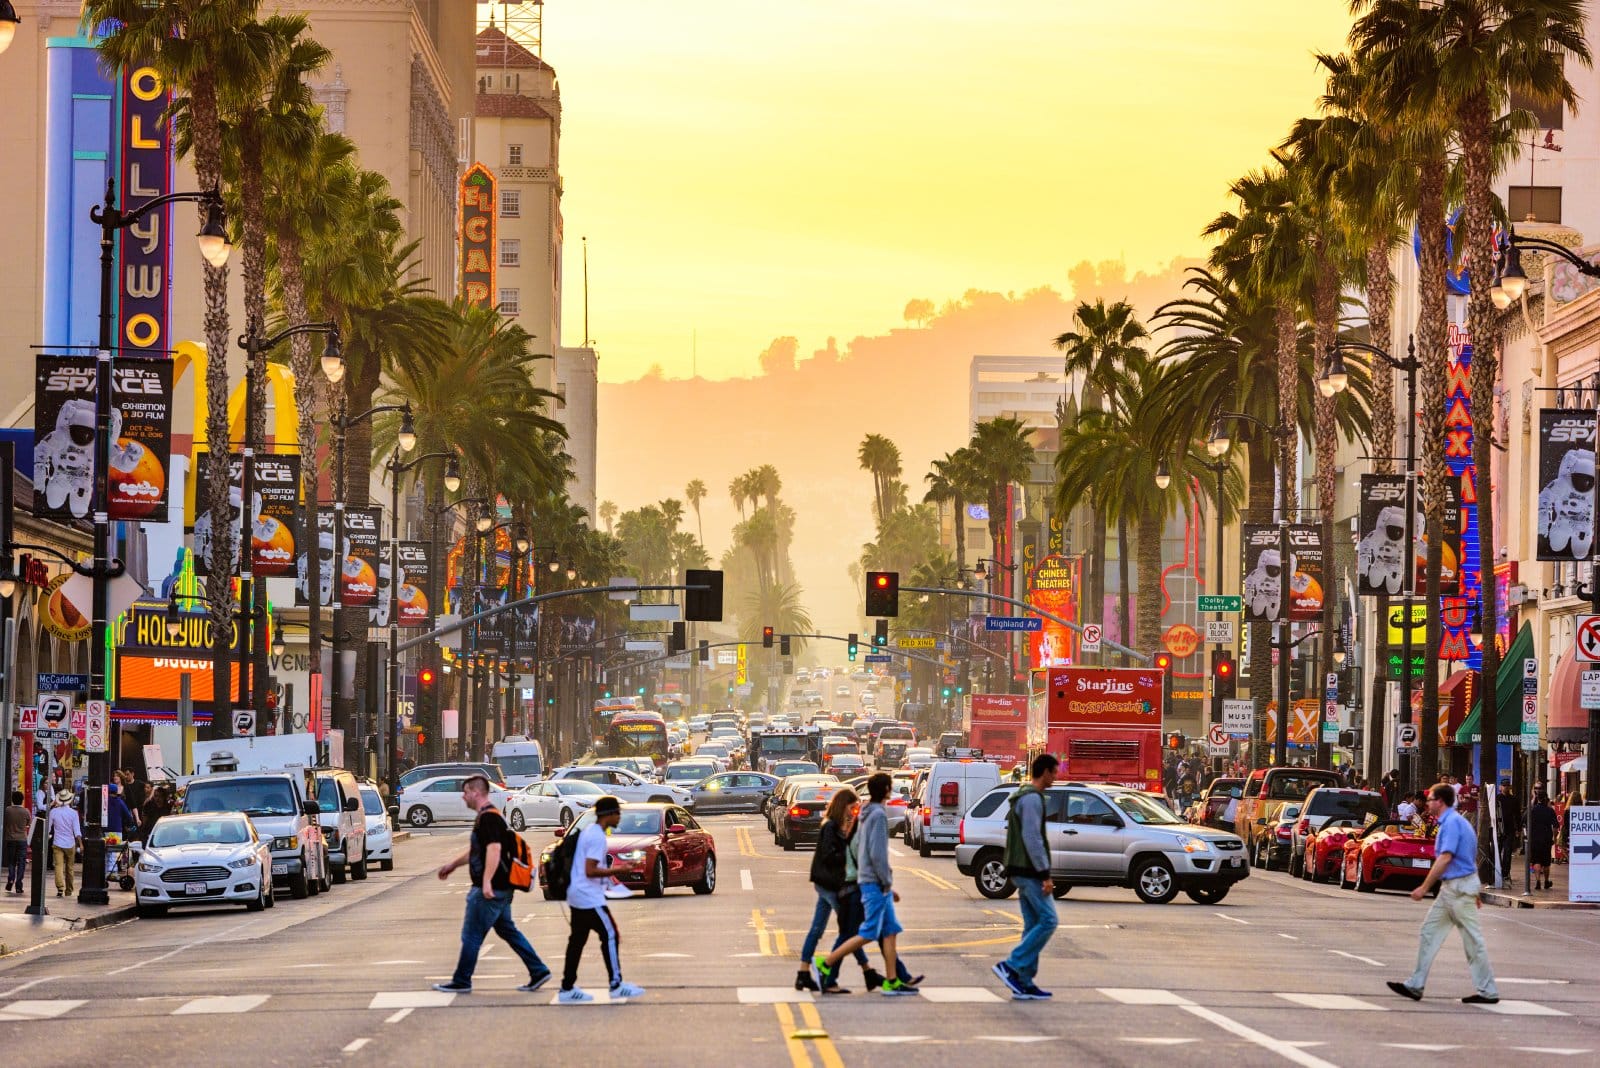 <p>California is a leader in tourism revenue, bringing in over $140 billion annually. Visiting Disneyland can cost a family of four approximately $500 for a single-day visit, excluding food and lodging.</p>